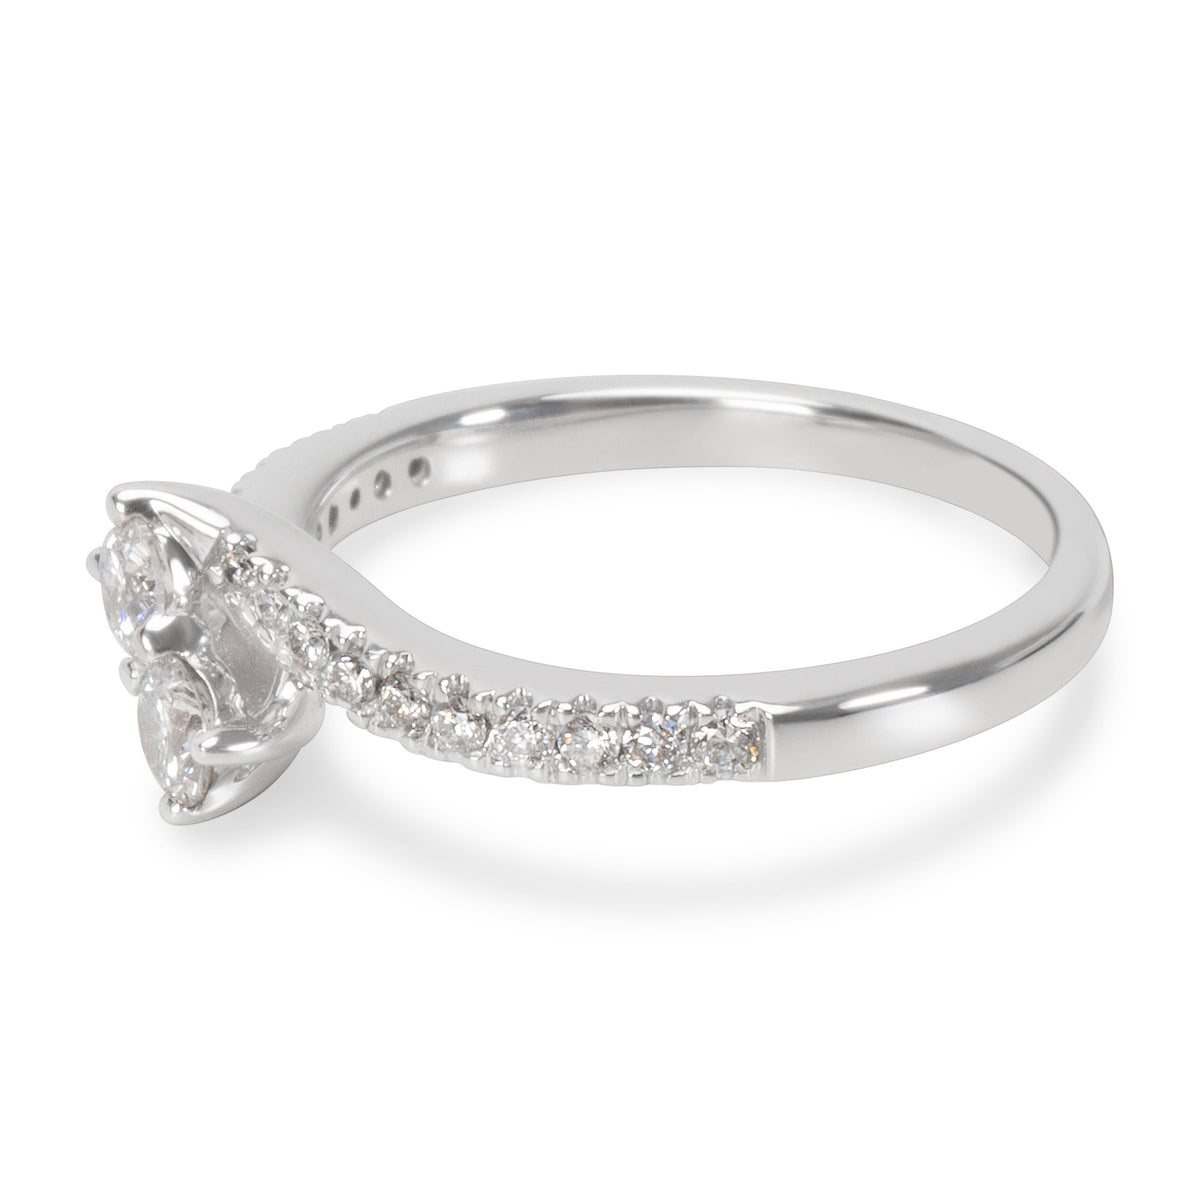 BRAND NEW Two Stone Diamond Ring in 14K White Gold (0.75 CTW)